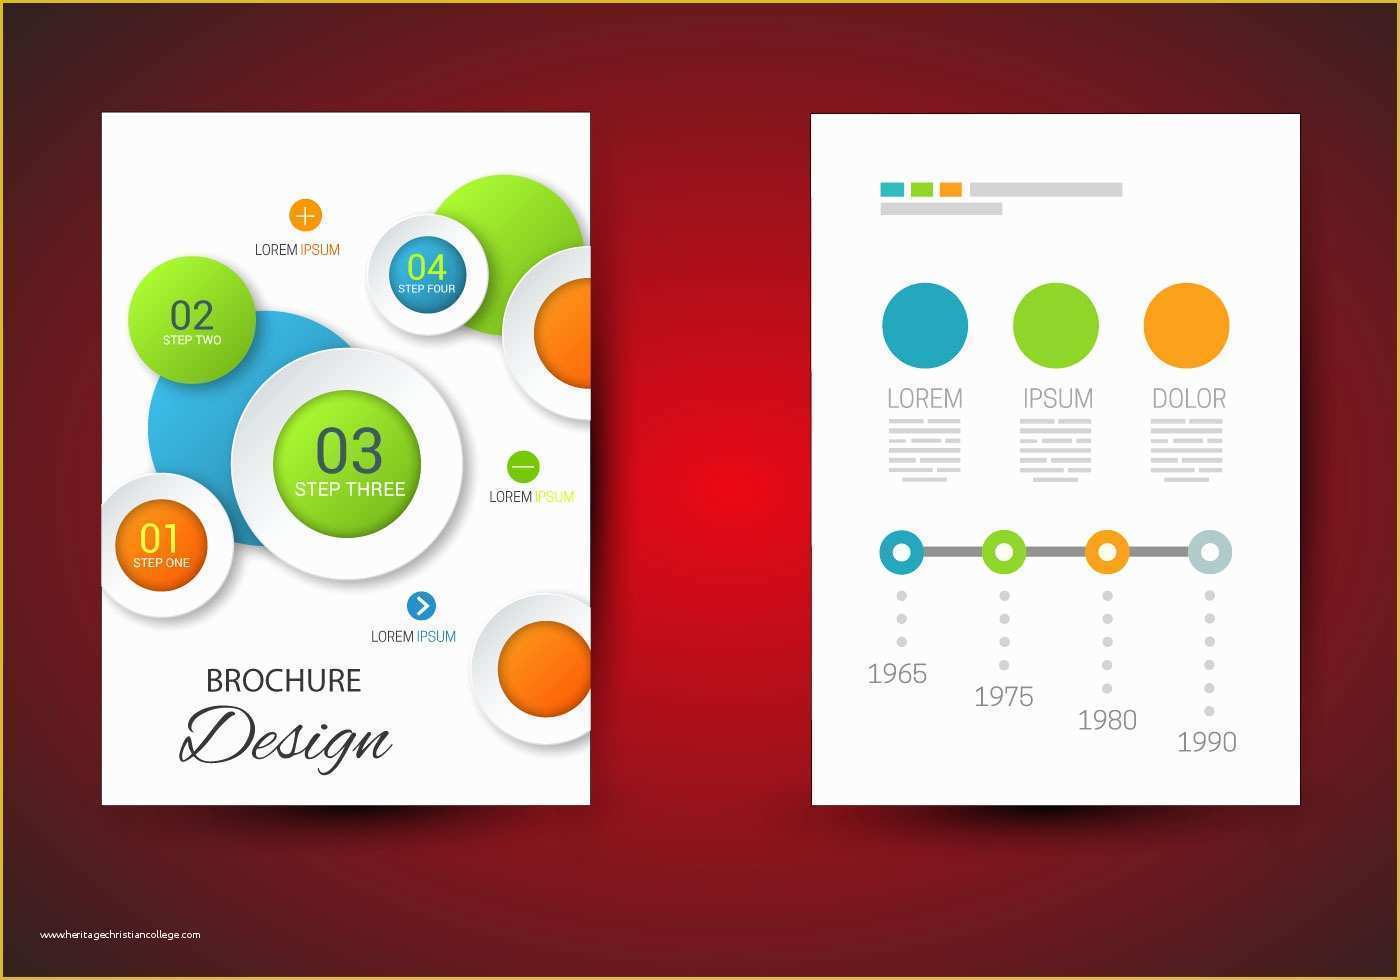 Template Free Download Of Free Brochure Template Vector Download Free Vector Art